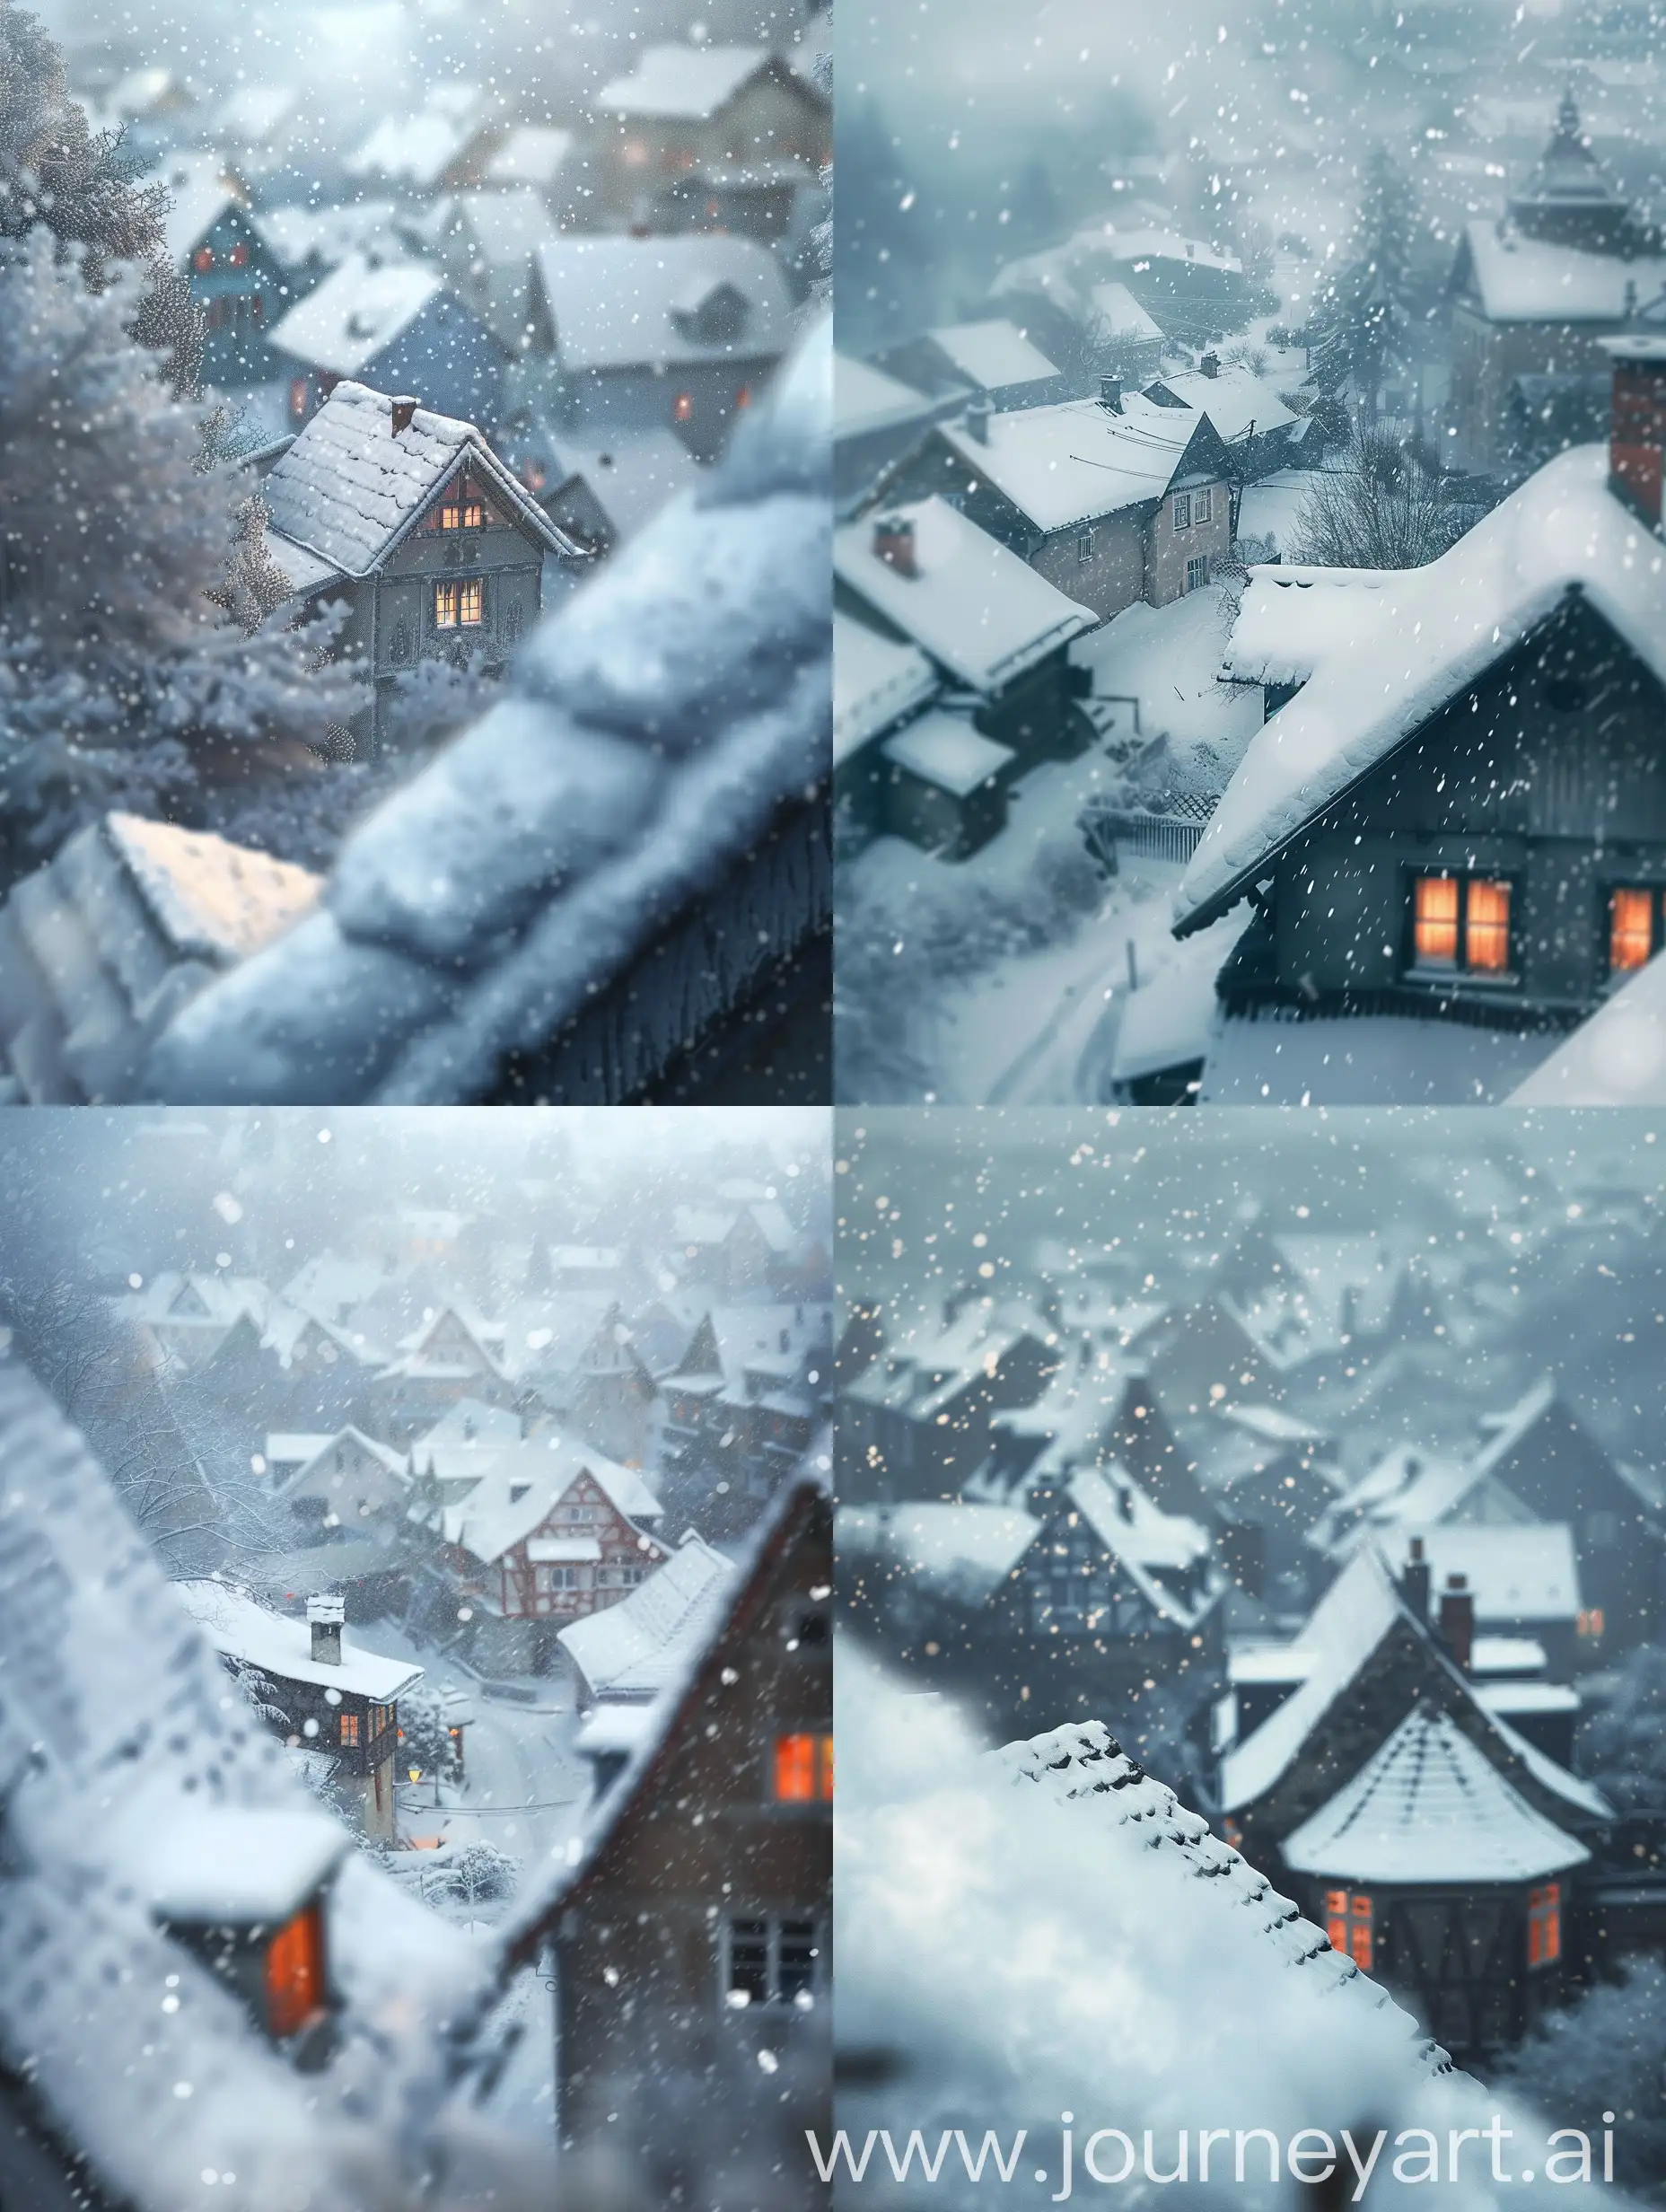 Winter-Village-Scene-After-Snowfall-Aerial-View-with-Soft-Focus-Ambiance